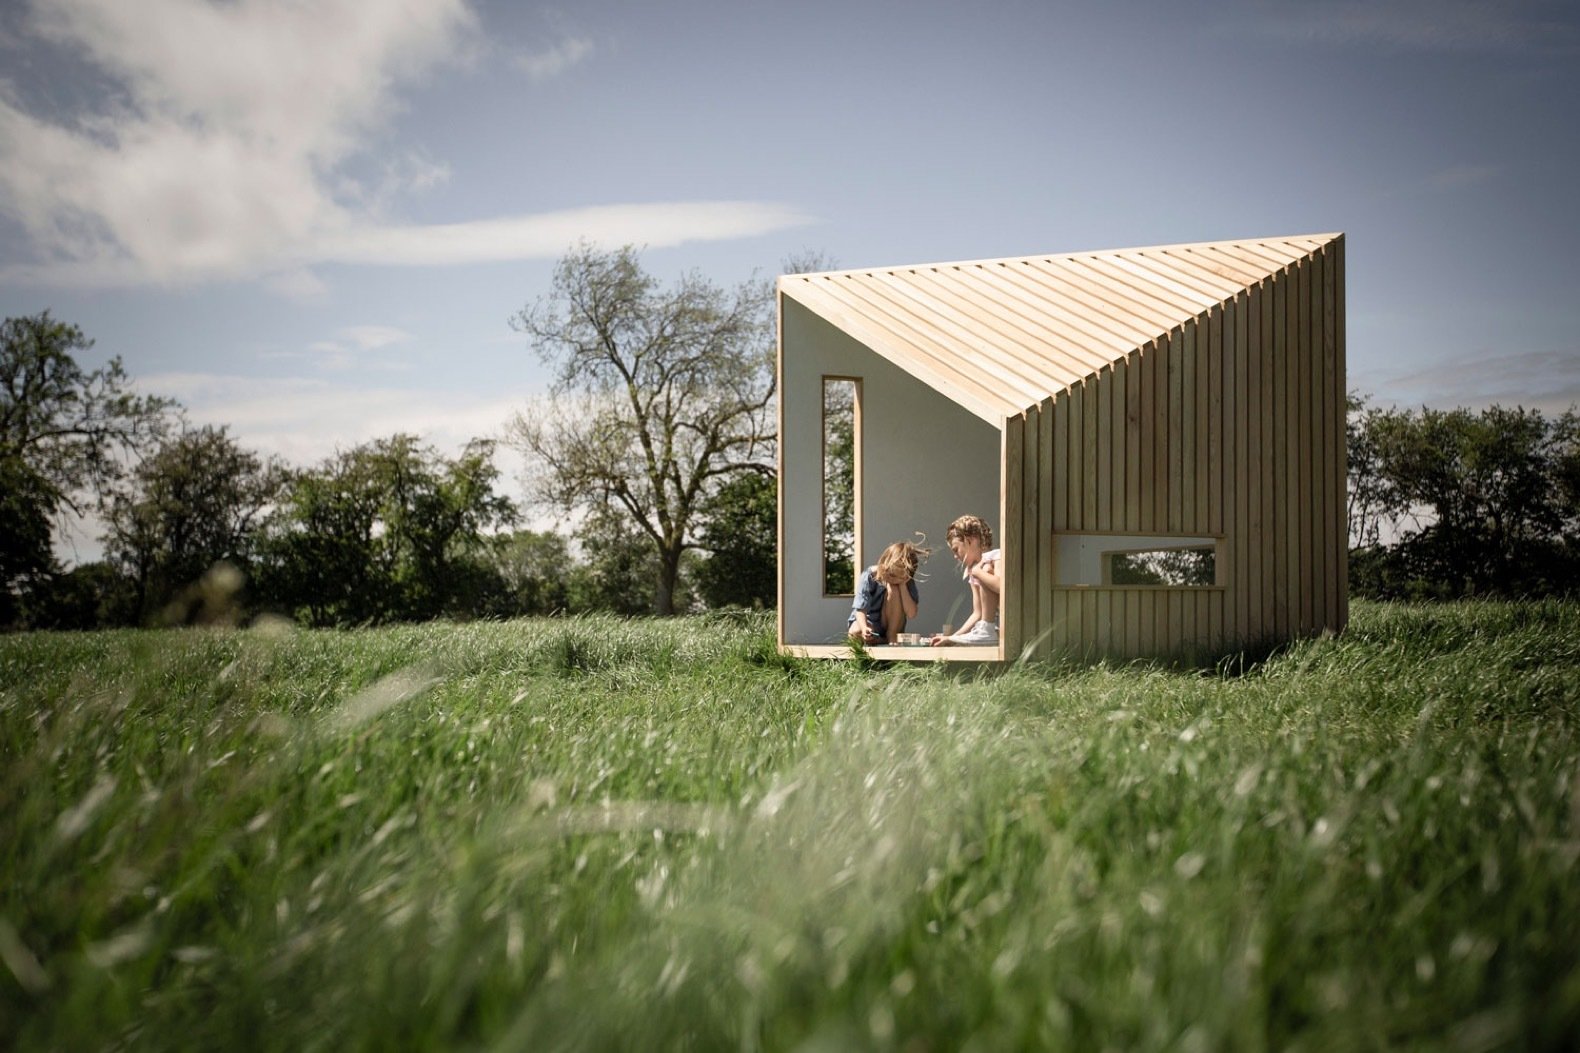 This Tiny Modular Cabin Is Just for Kids—and We’re Totally Jealous